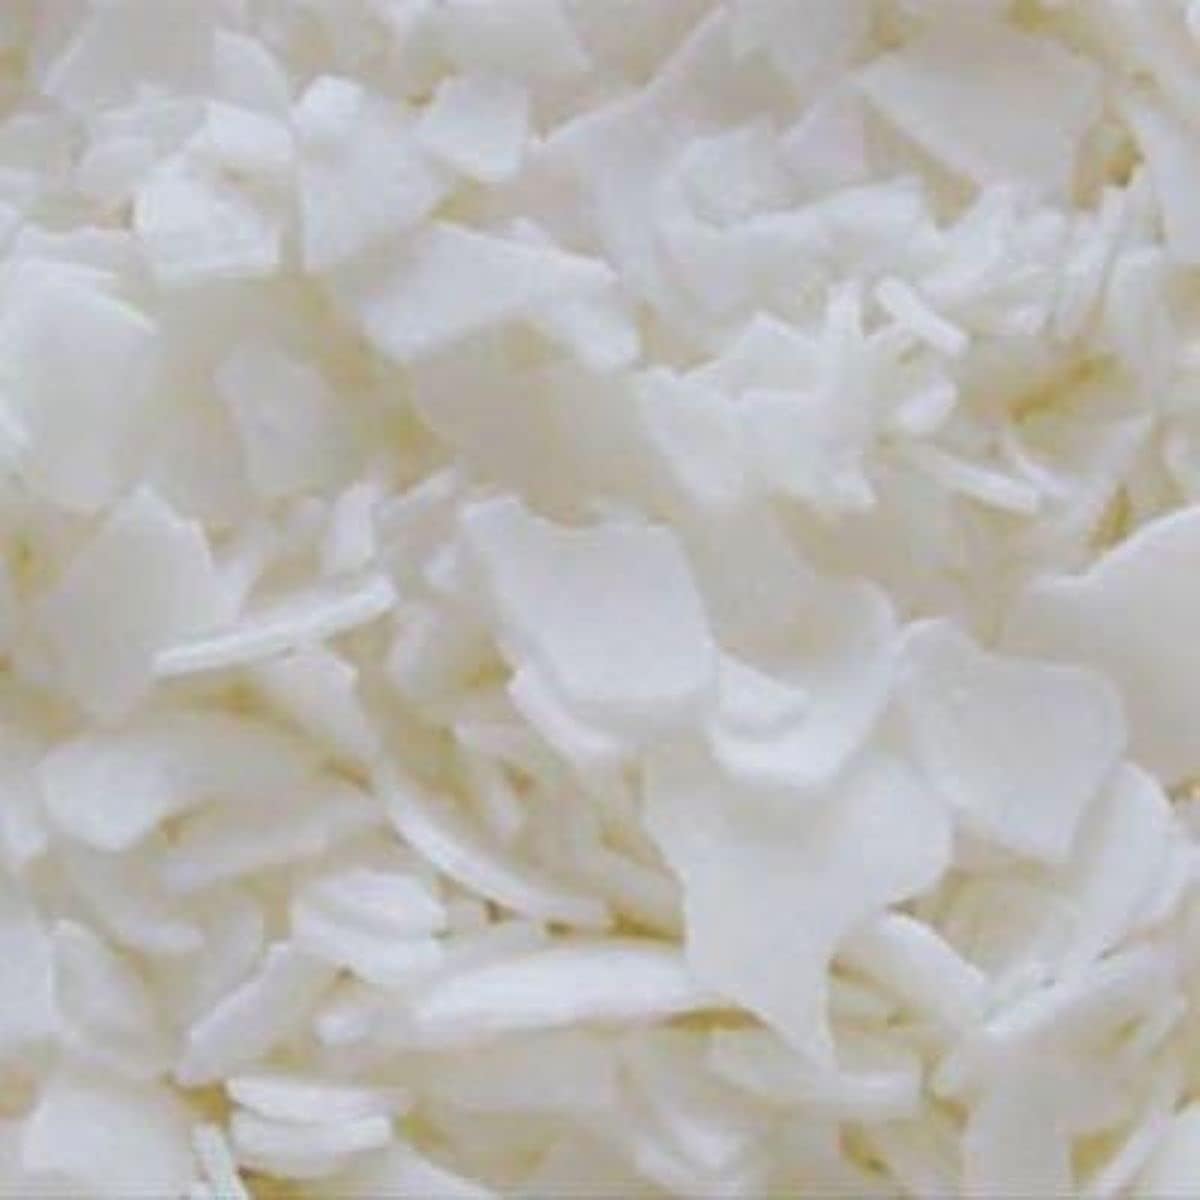 Pure Soy Wax 416 for Candle and Tart Making - 5 LB